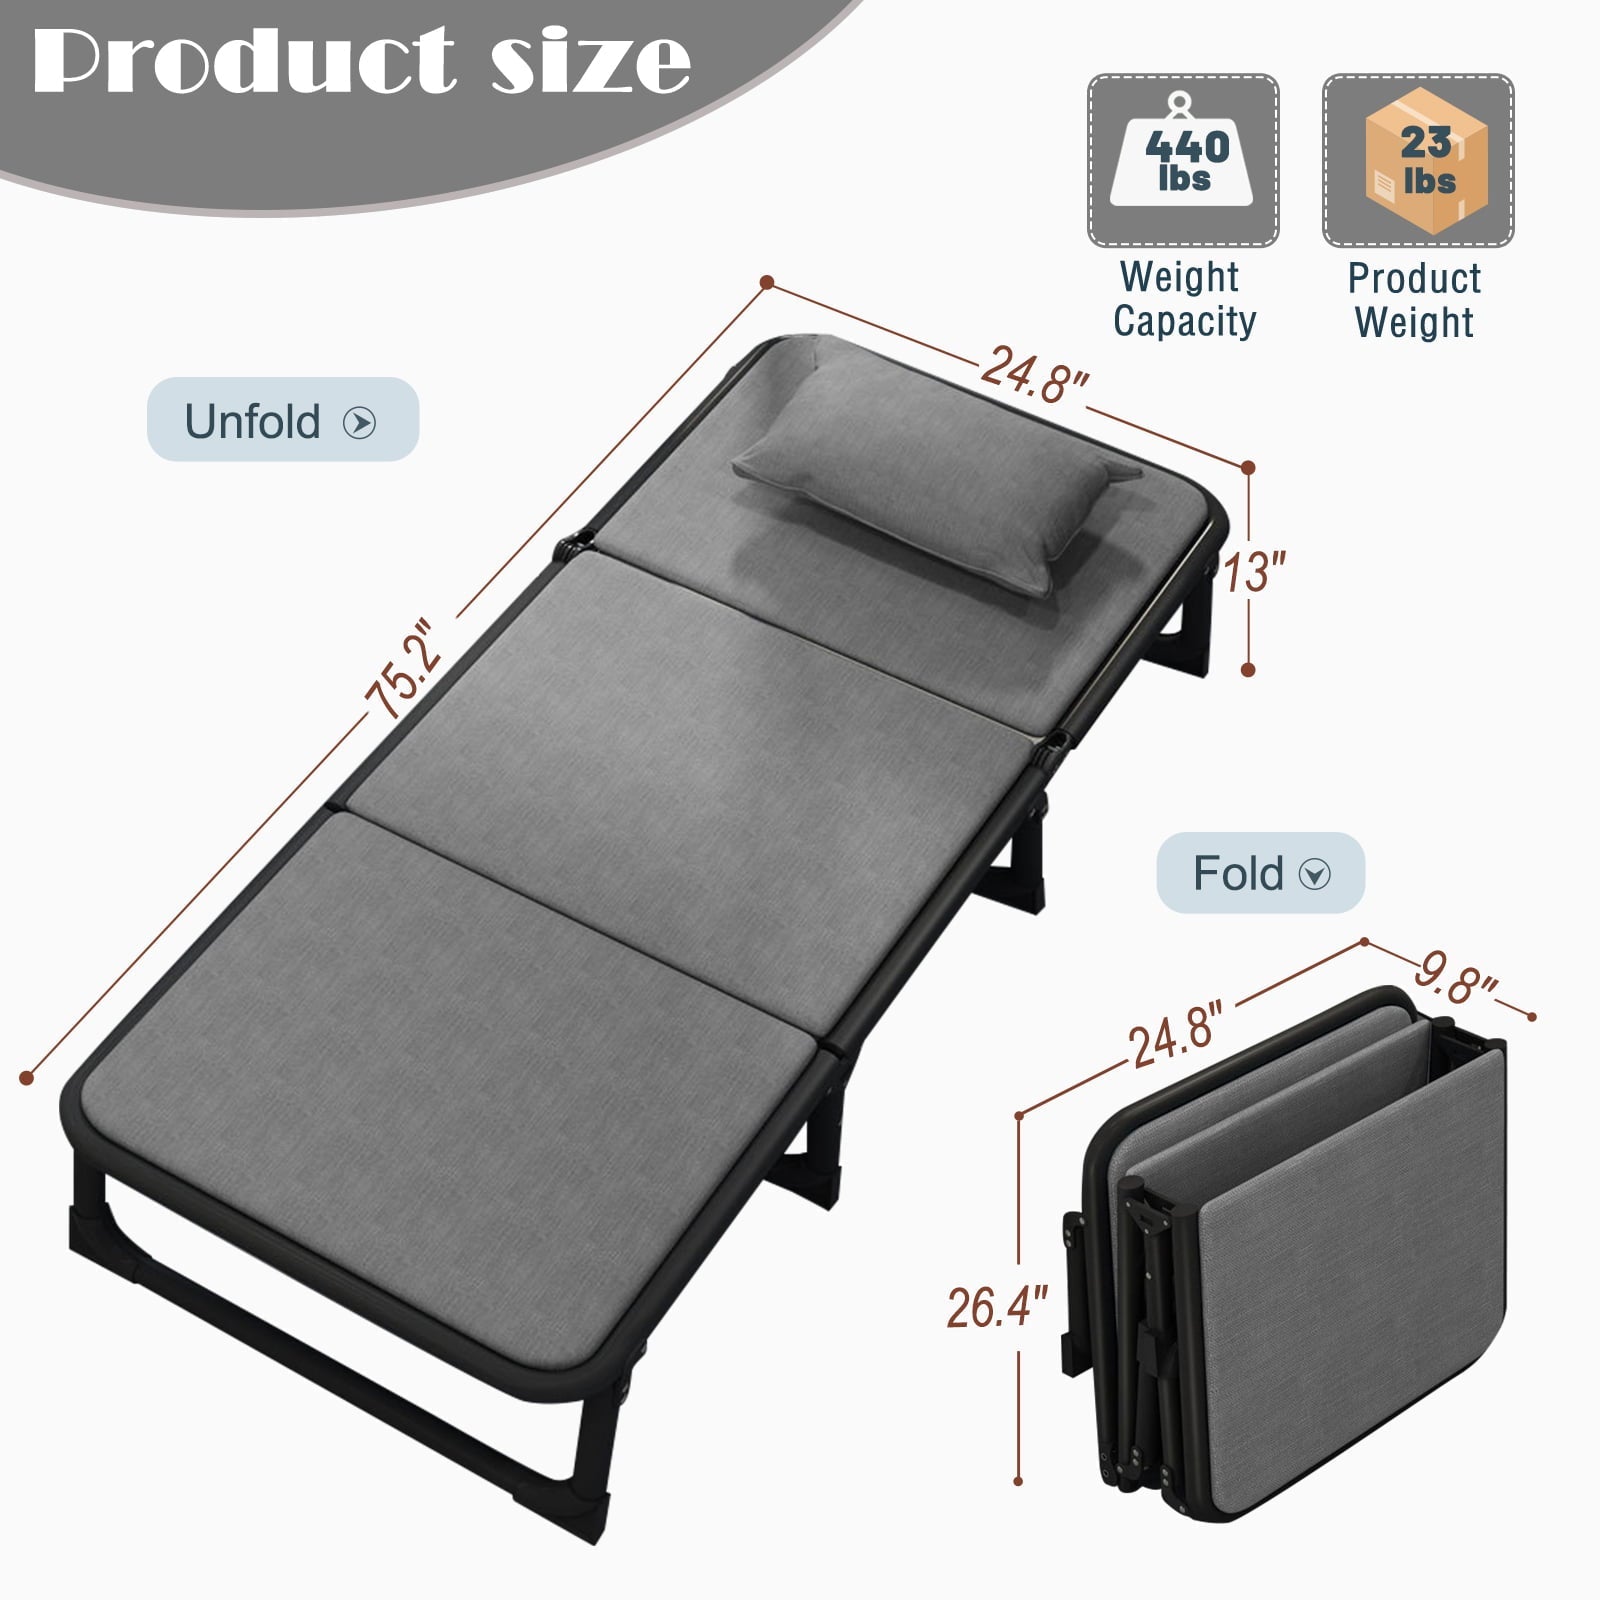 MOPHOTO Folding Bed Cot, Portable Beds Frame, Portable Fold Up Bed for Outdoor Travel, Foldable Bed with Frame, Foldaway Guest Bed, Sleeping Bed Cot for Adults, Office, Gray